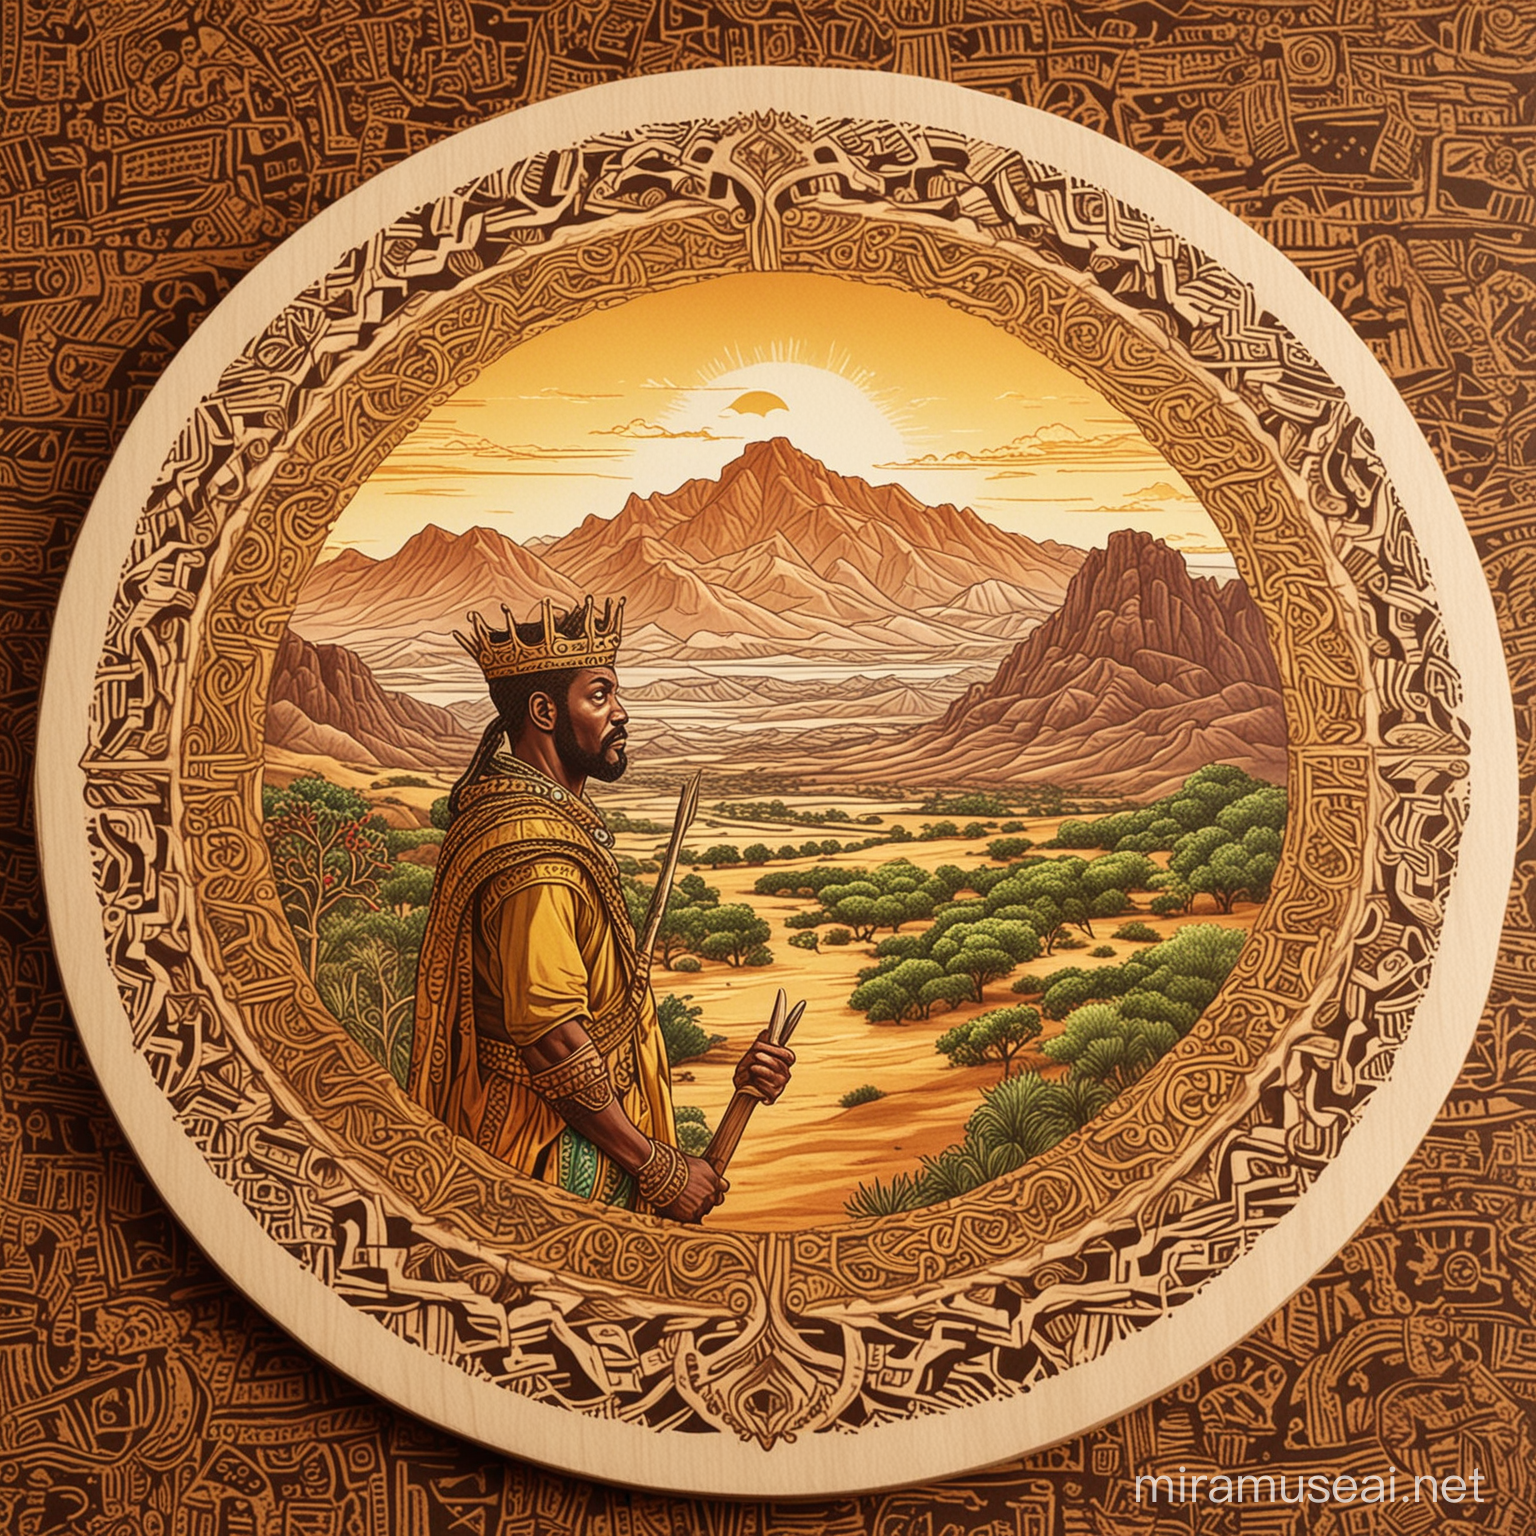 create a circular 
logo, realistic  adult coloring book style, African inspired, west Maui mountains and the image of an african king at the centre  the in background,  simplified, cultural inspired, 2 colors, vector, include logo name "The Spice Kingdom" on bottom of logo, block print. make the view to have a tint yellowish gold
